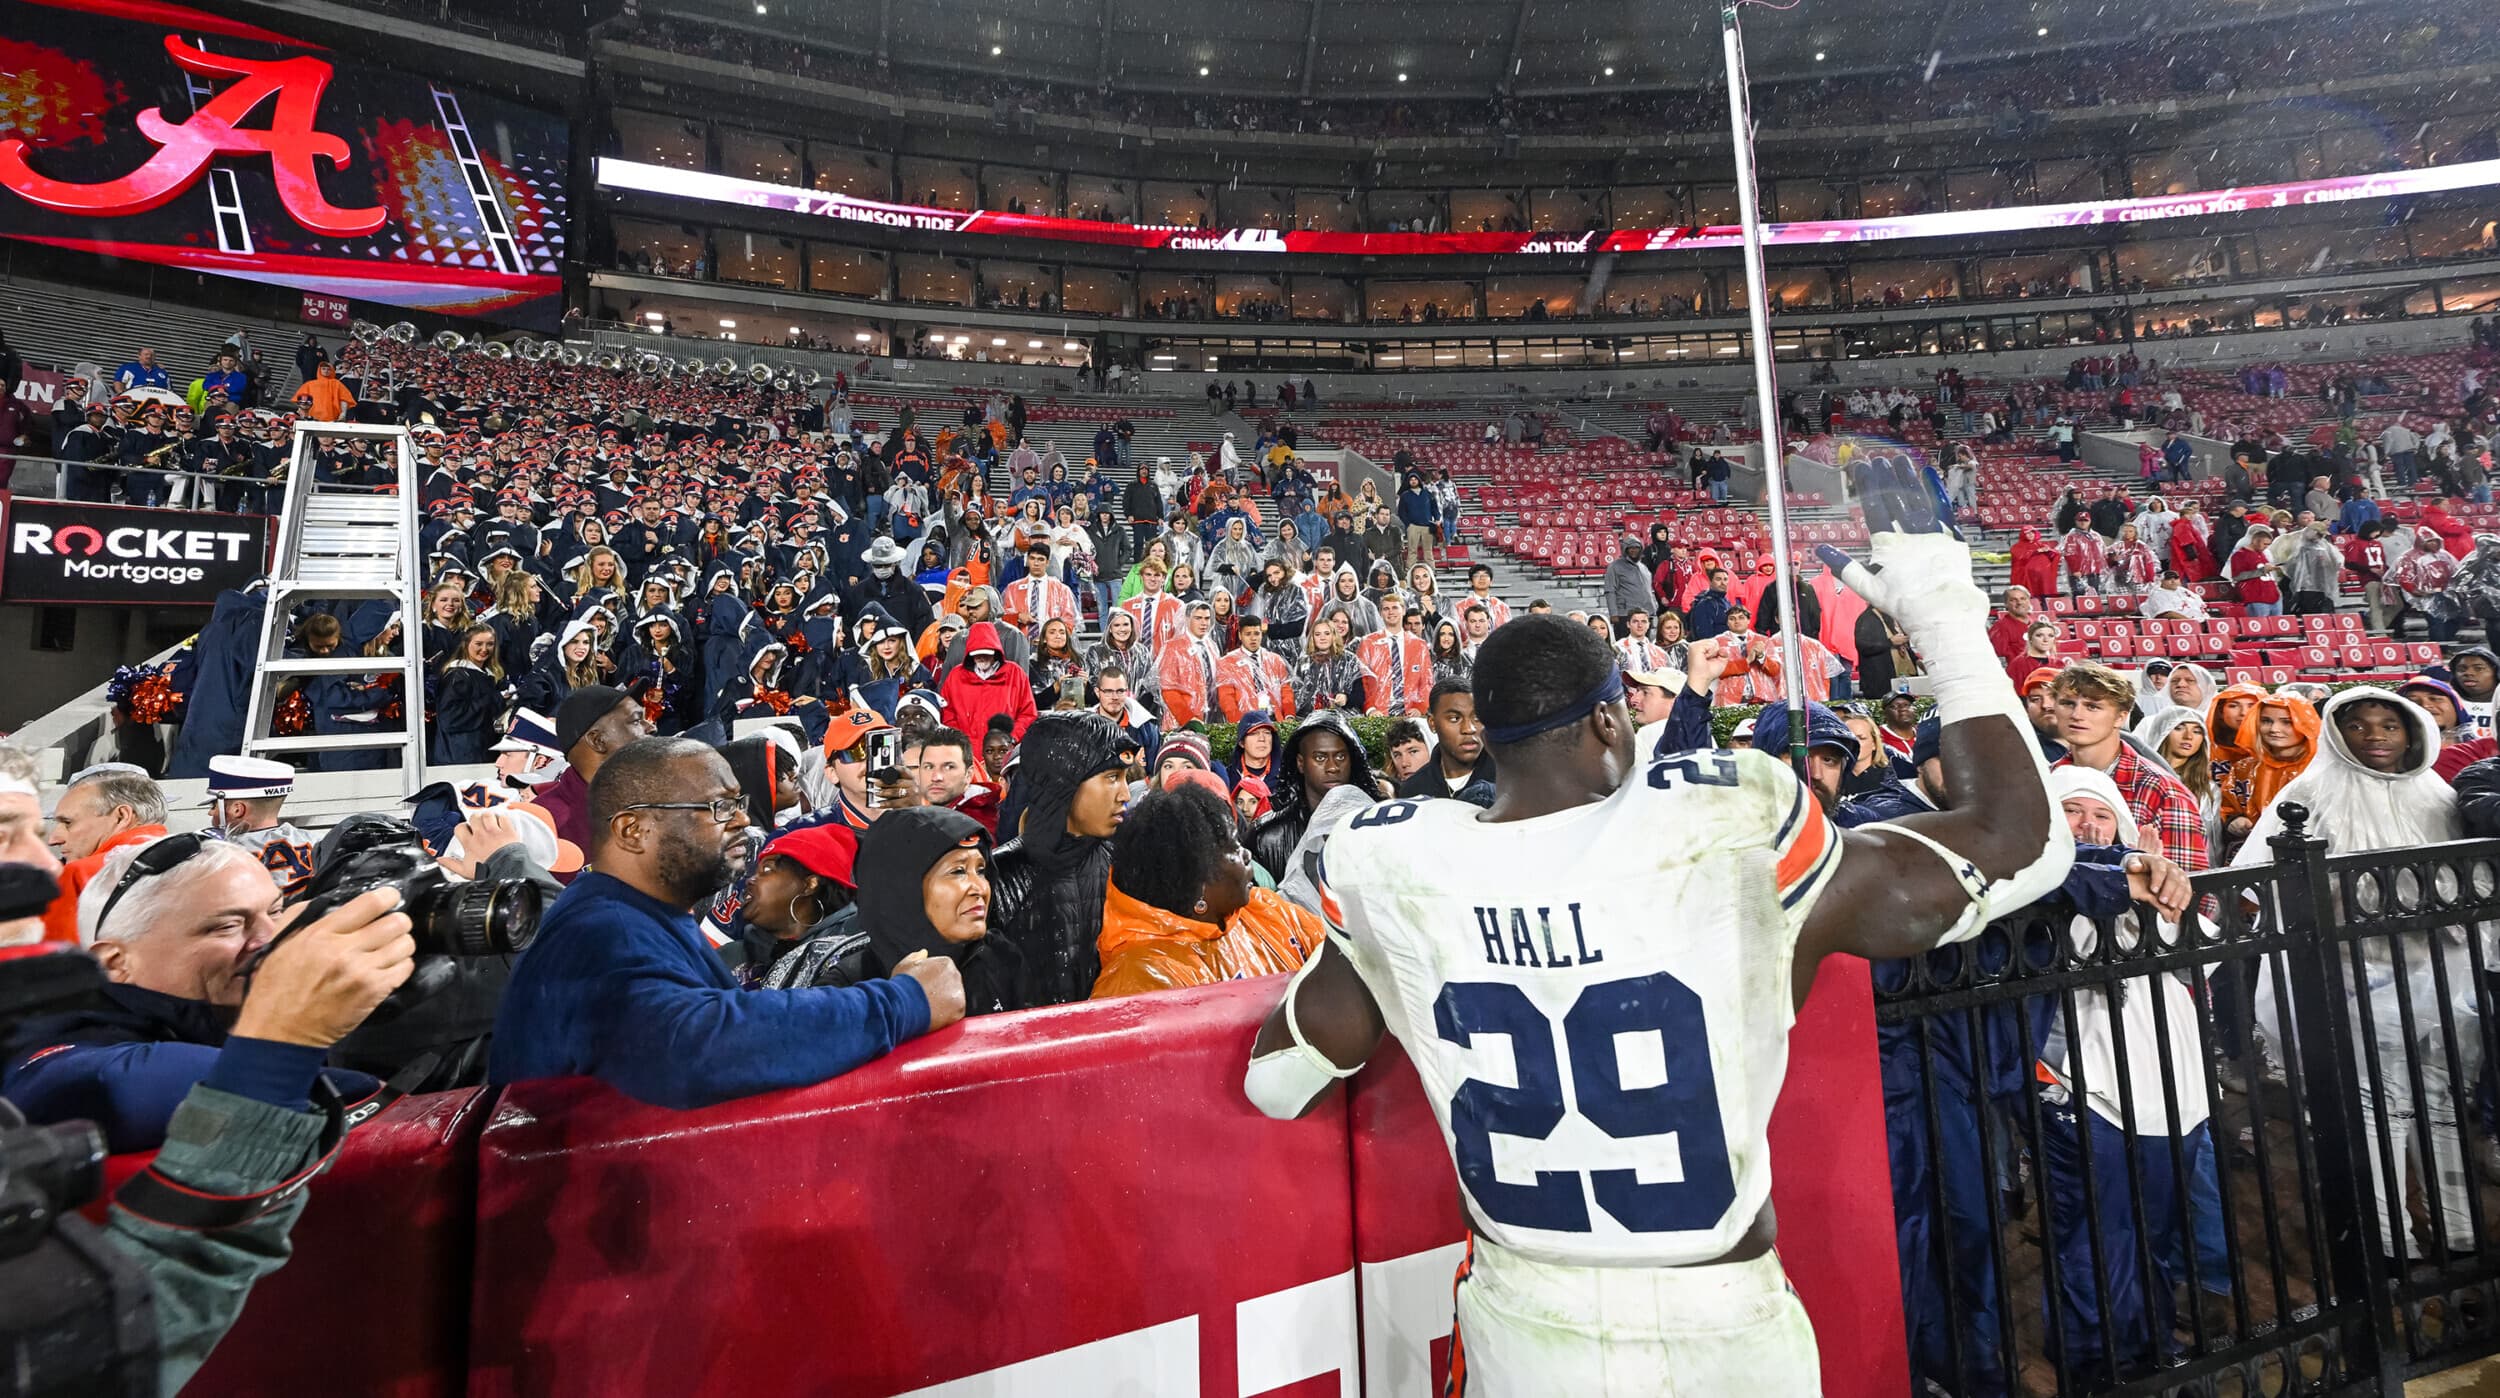 Derick Hall (29) thanks the Auburn fans after the game Saturday acknowledging their cheers. Auburn vs Alabama  on Saturday, Nov. 26, 2022 in Tuscaloosa, Ala. Todd Van Emst/AU Athletics